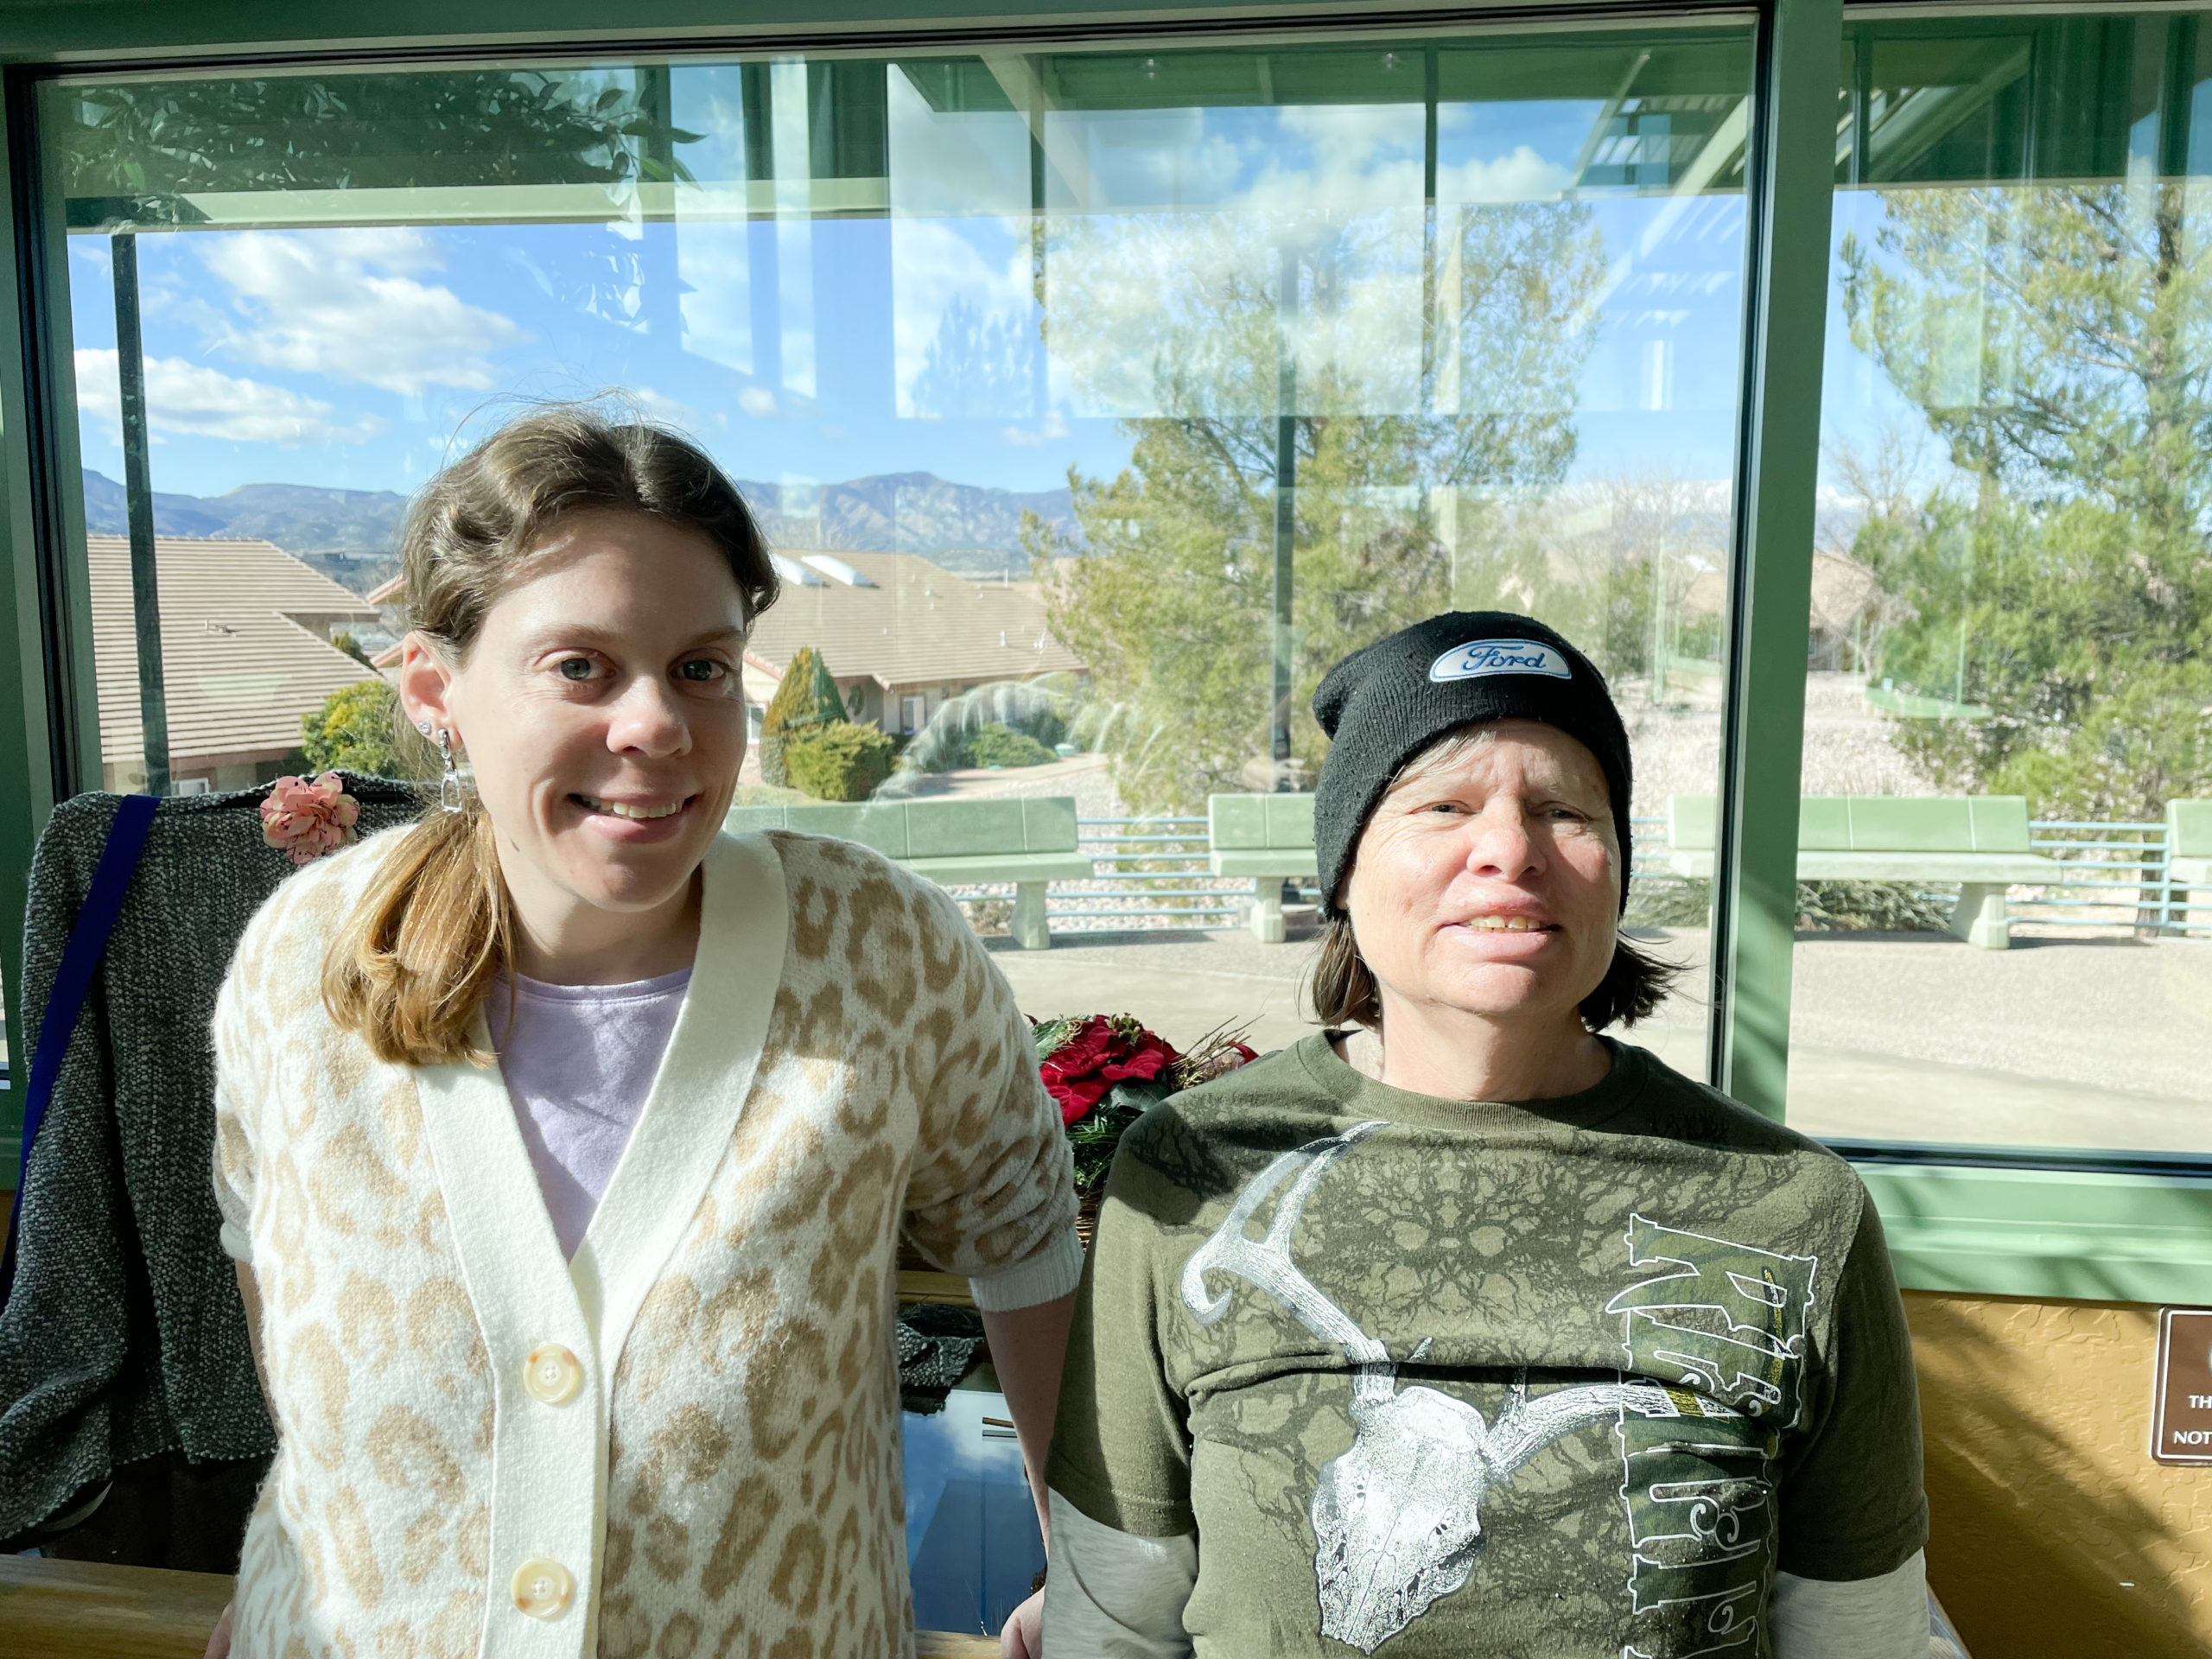 Resident Ranchers, Julie and Kelly, stand in front of a window at Rainbow Acres and pose for a picture. Rainbow Acres is a residential Christian community for adults with developmental disabilities. Some of the neurodiverse residents are diagnosed with autism, down syndrome, adhd, depression, anxiety, PTSD, and many other disorders.